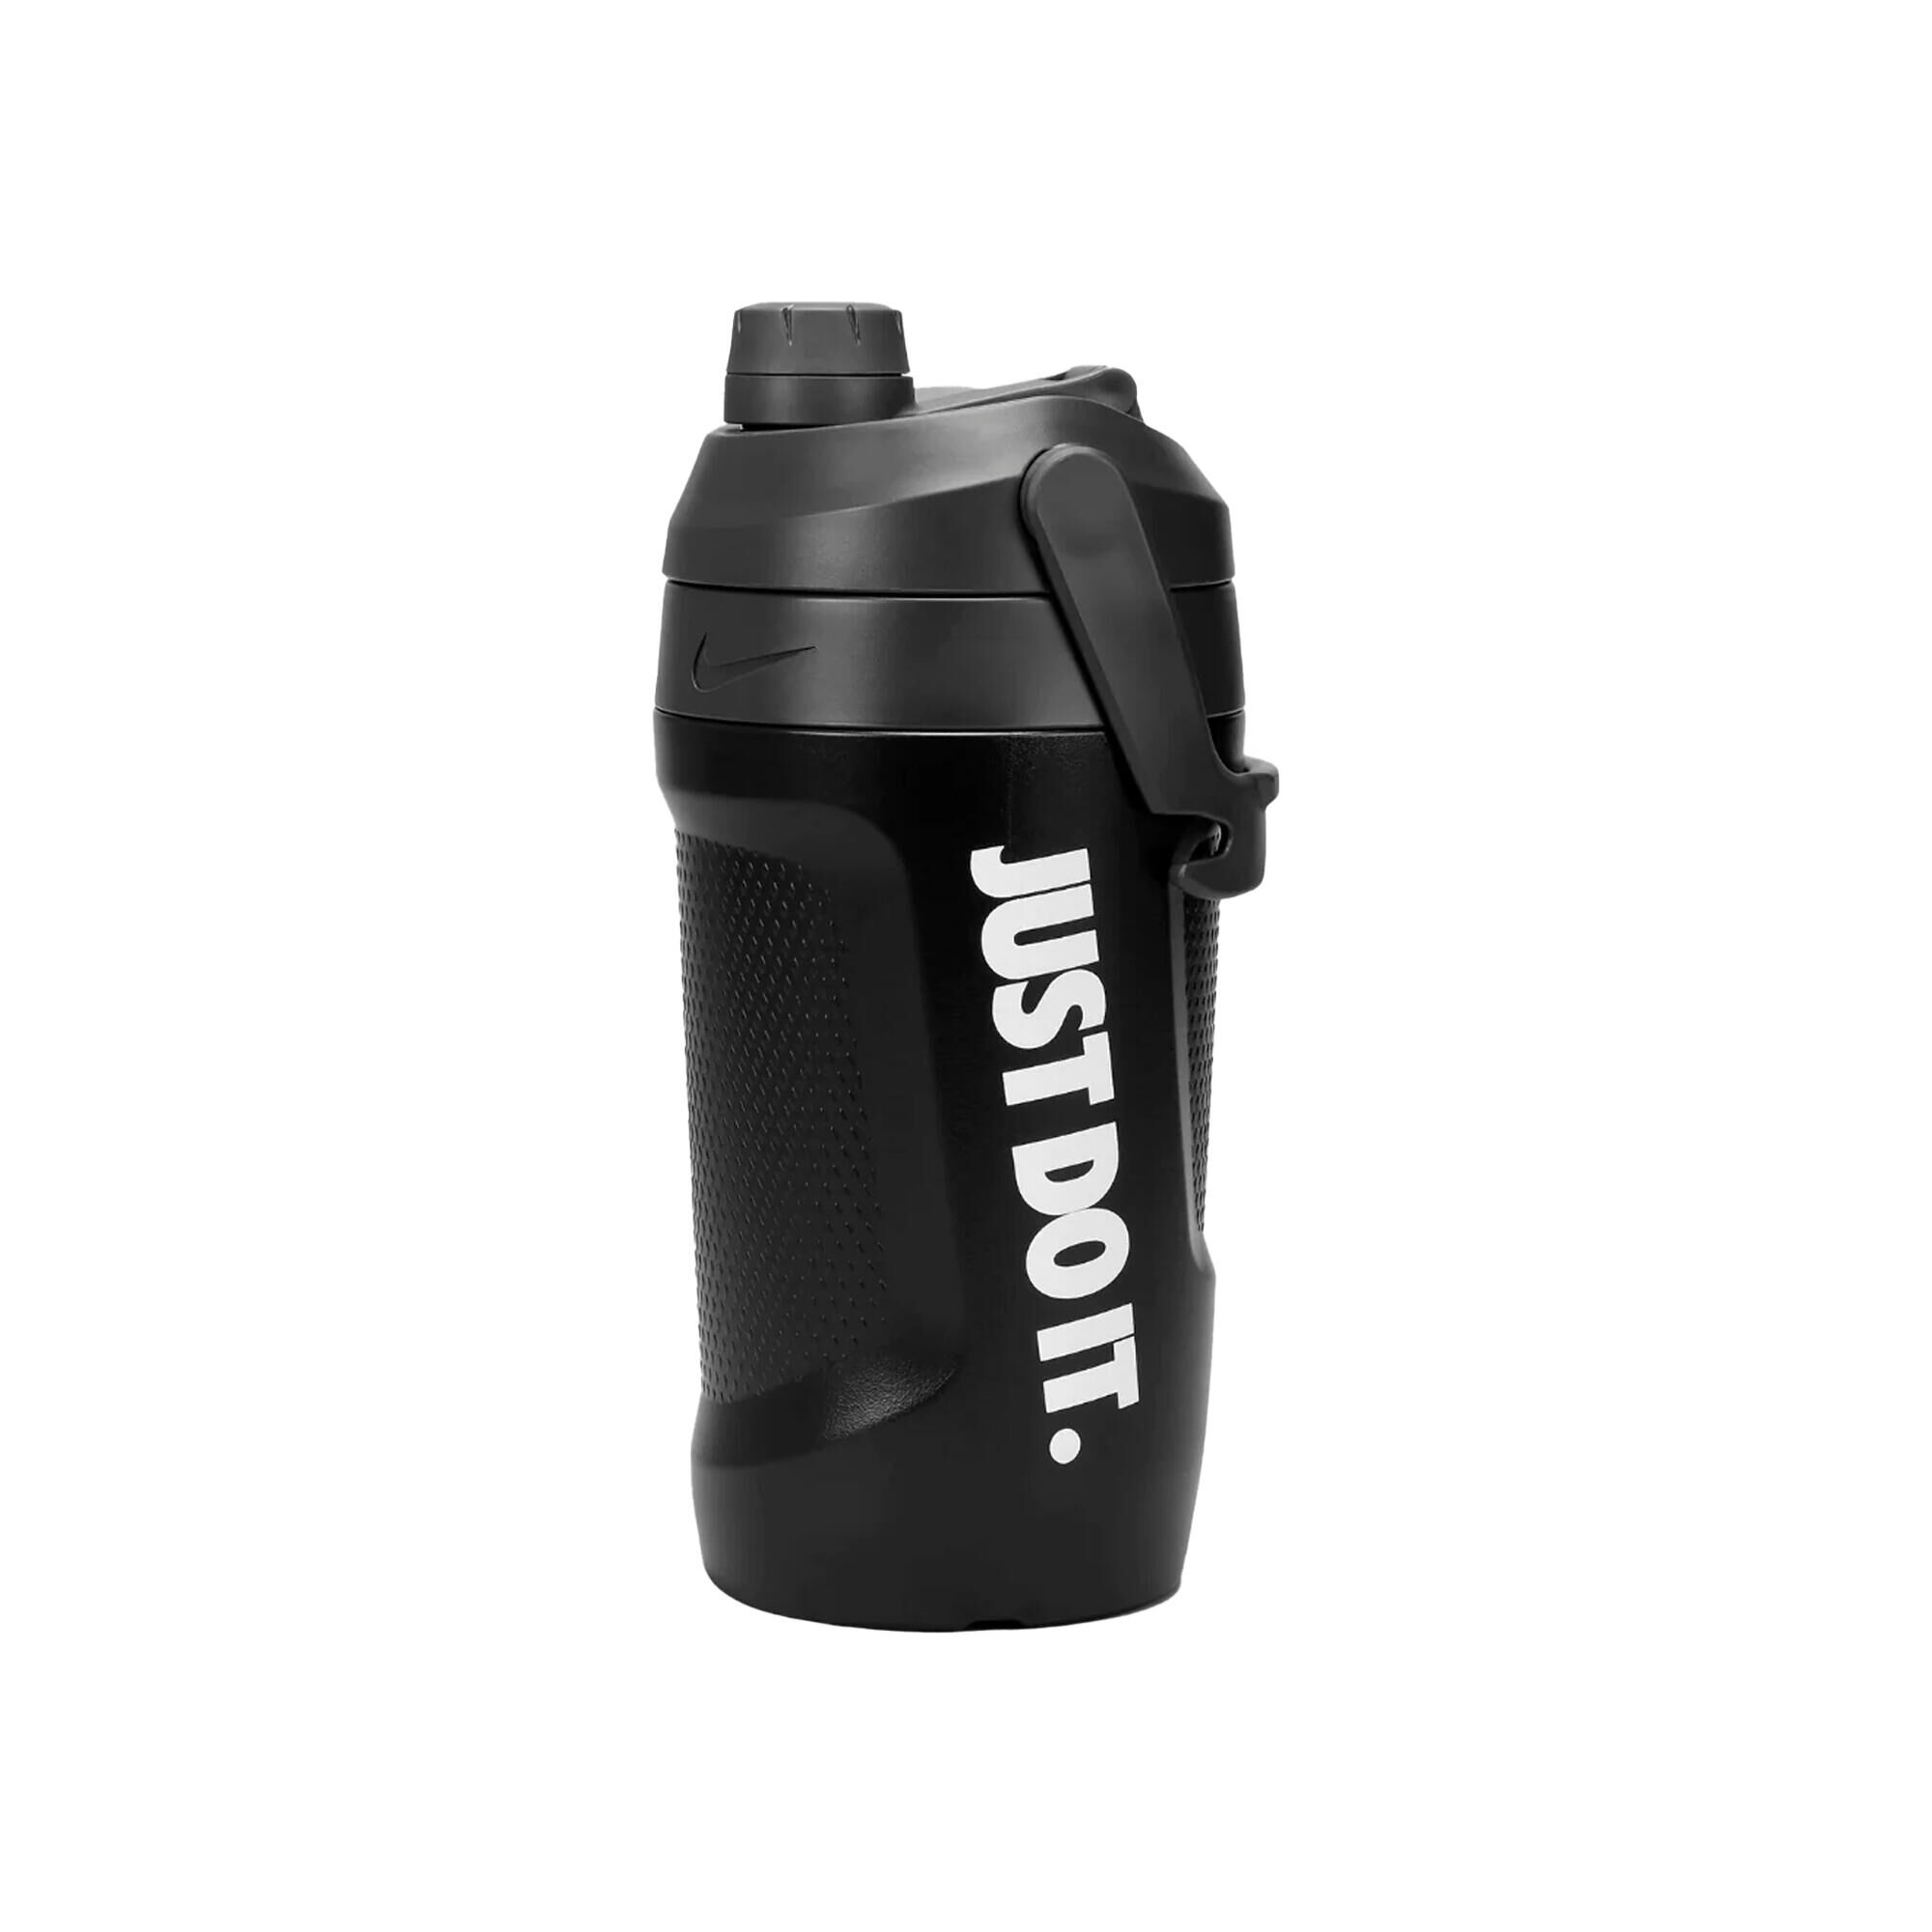 NIKE Fuel Water Bottle (Black/Anthracite/White)